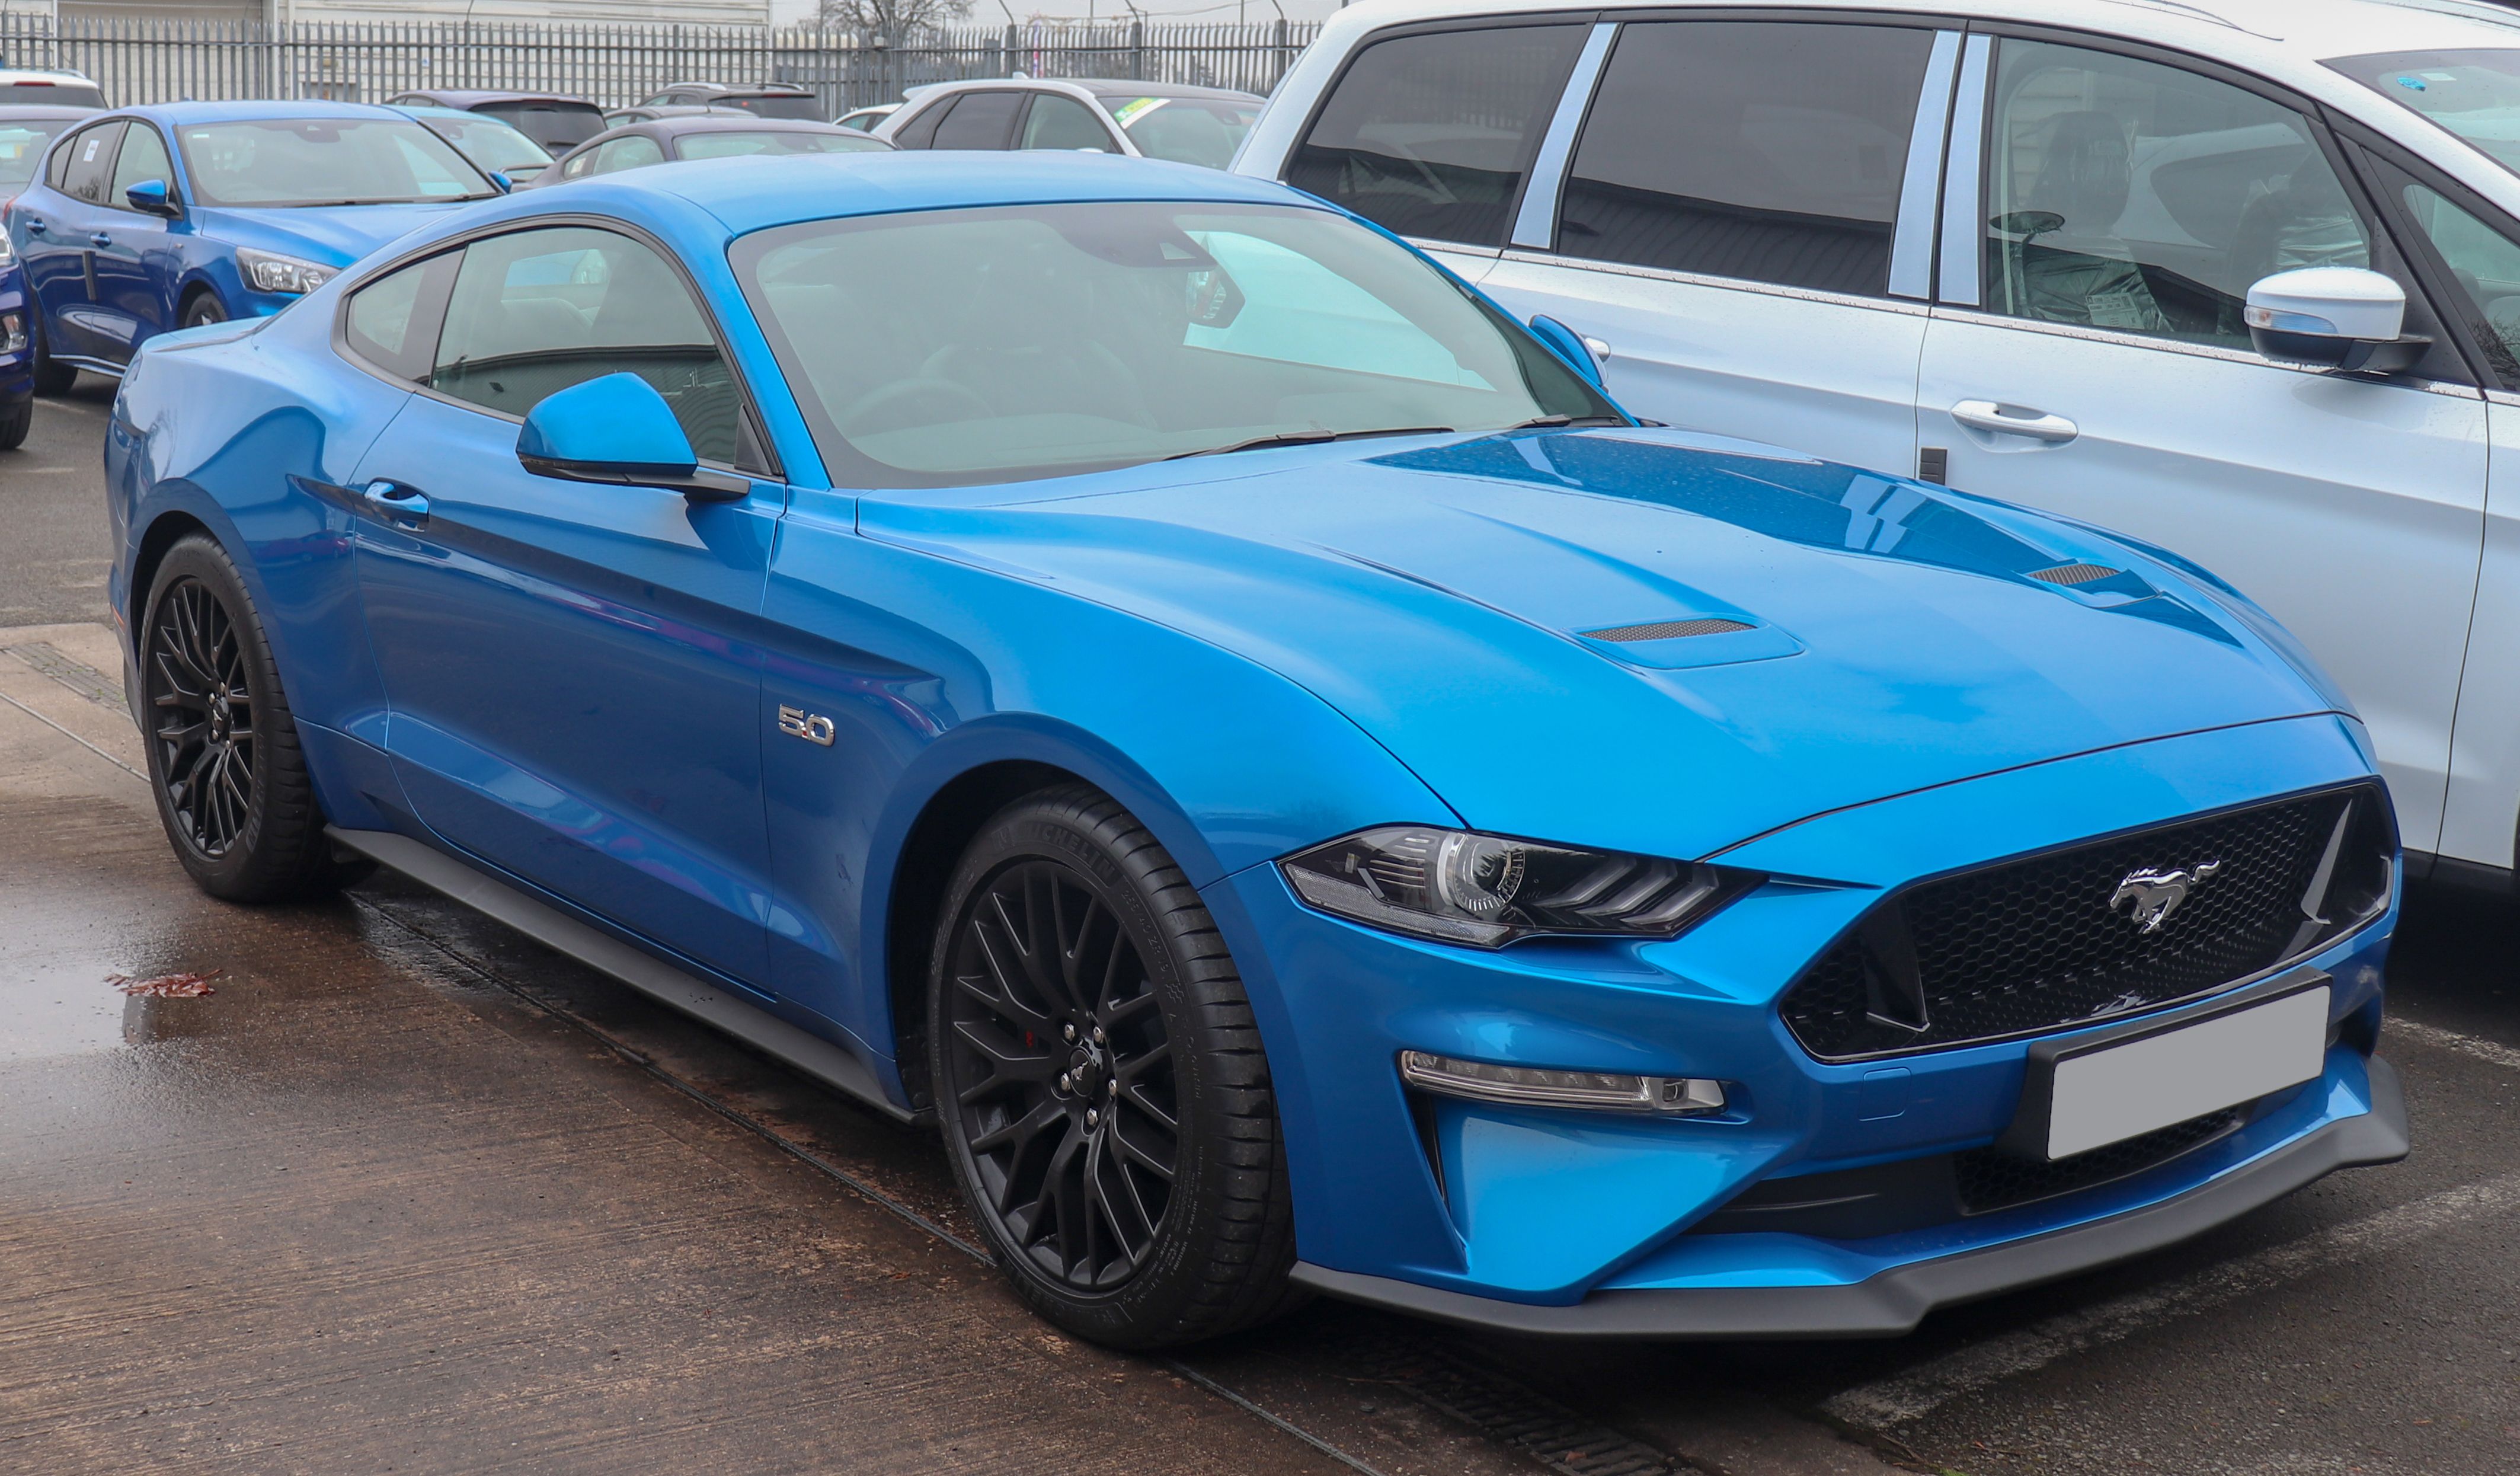 2019 Ford Mustang GT: The muscle car built for all ages.